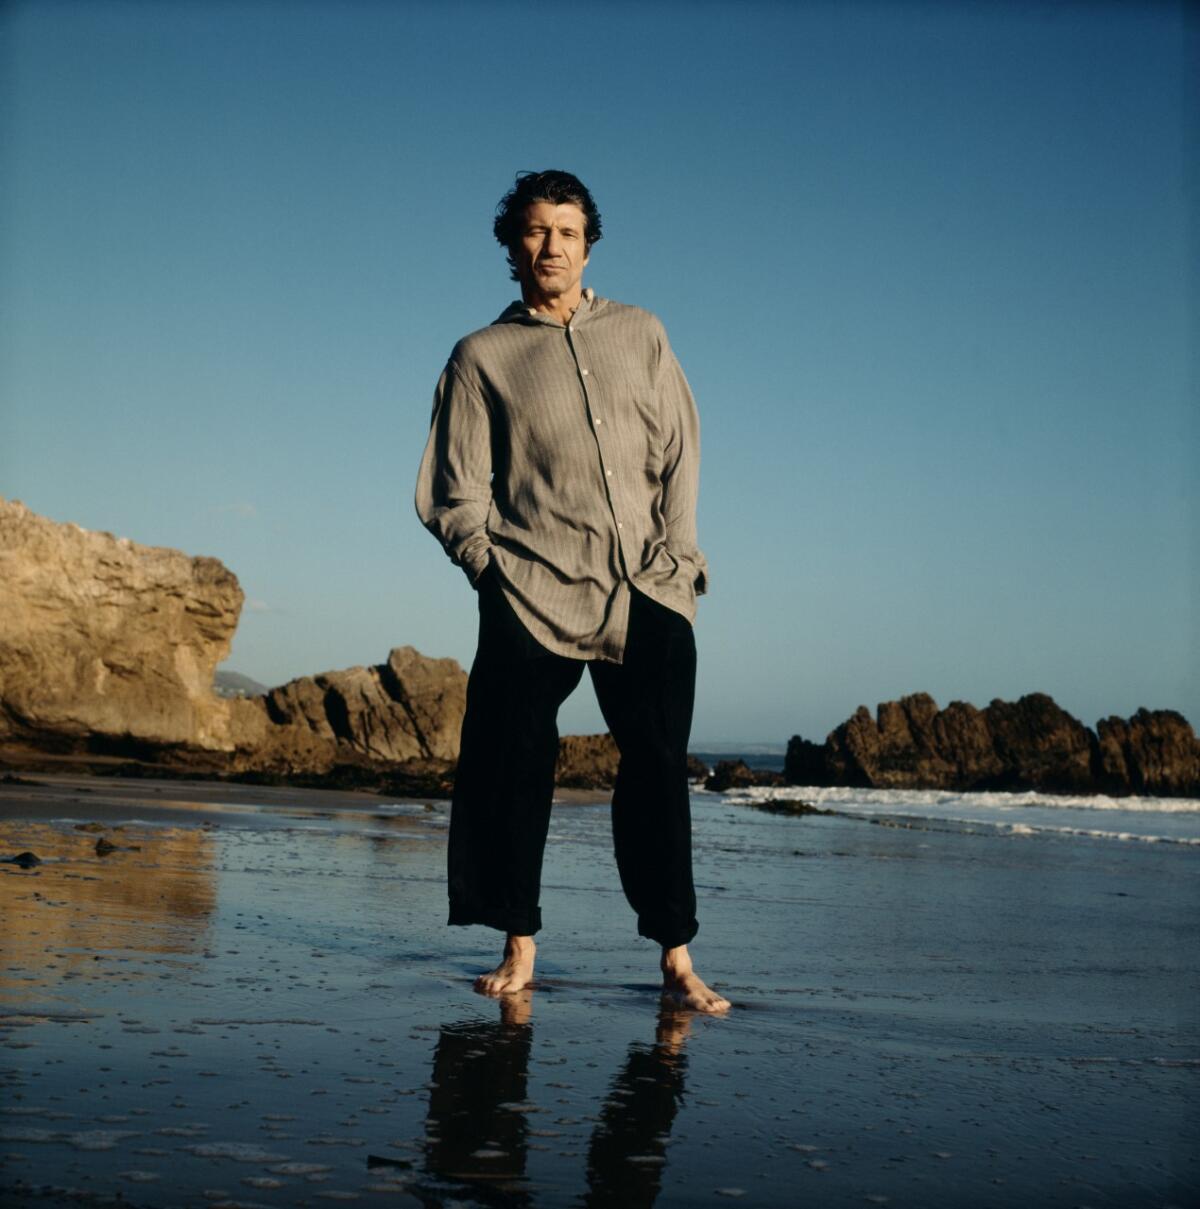 A man in loose clothing and bare feet stands on a beach with rocks behind him